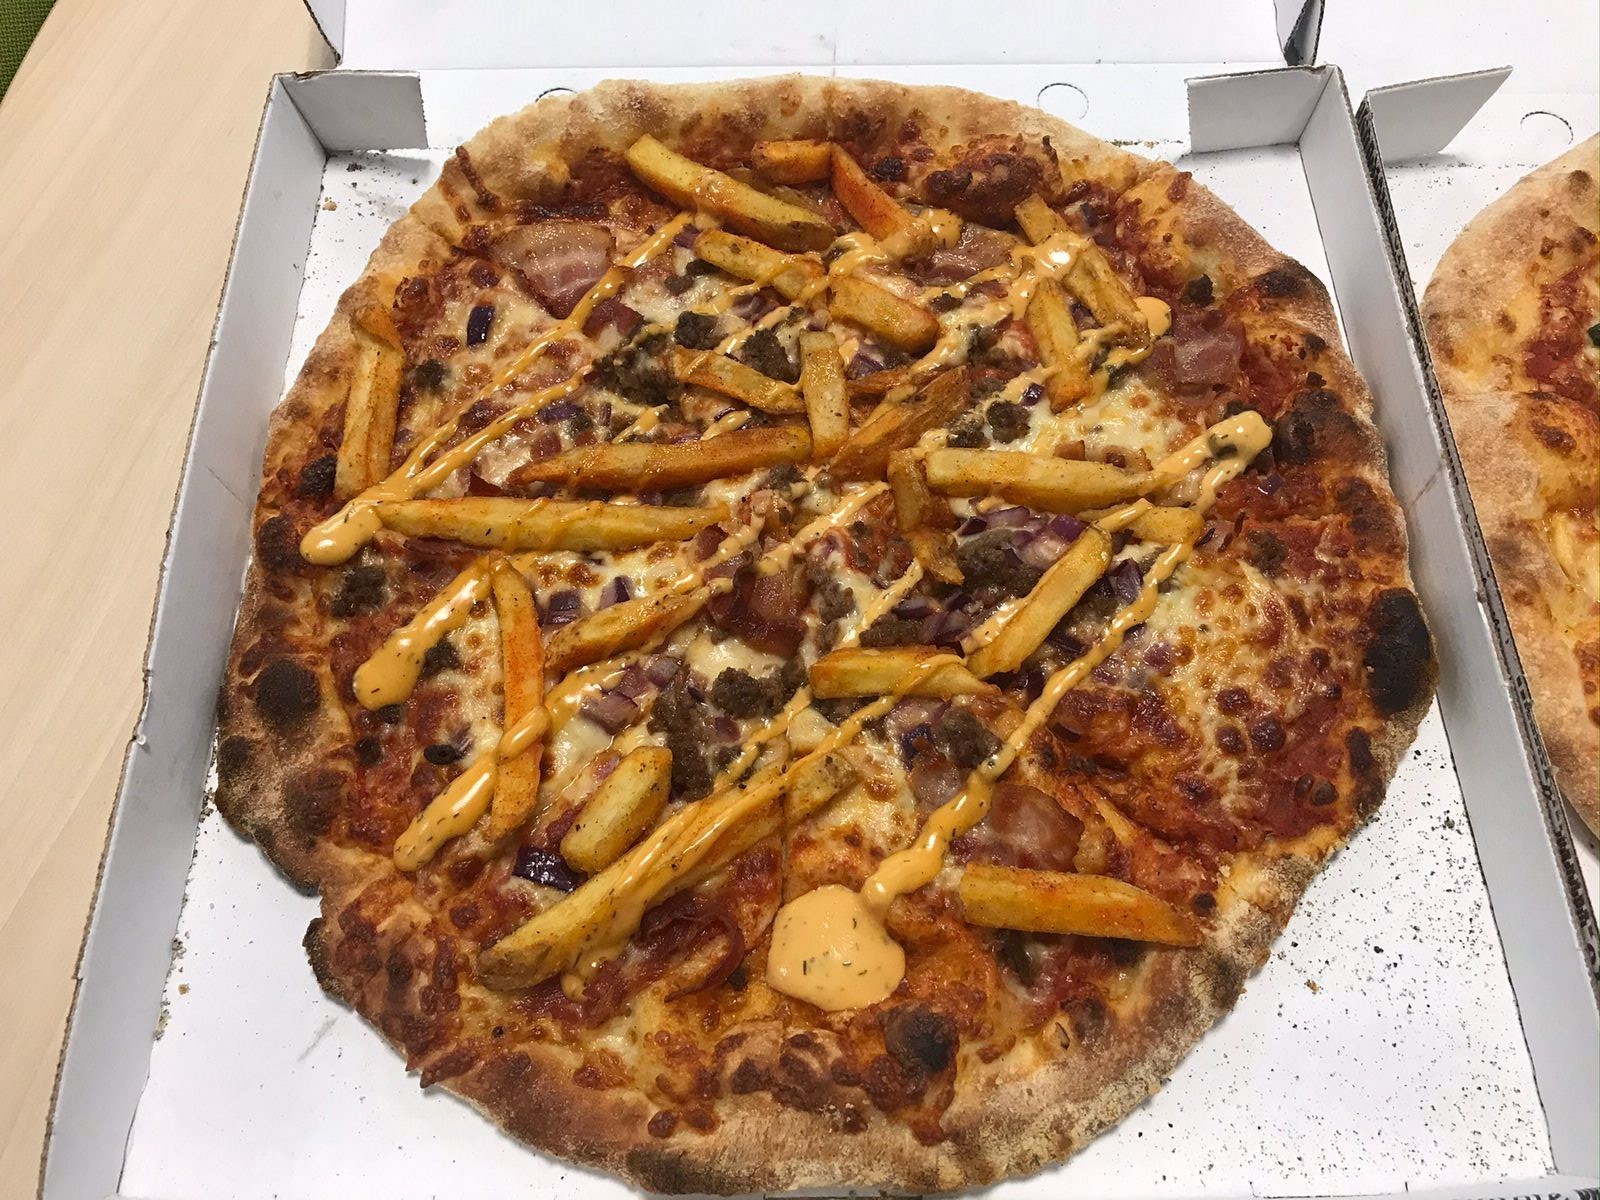 The cheeseburger pizza was tasty, despite being something we havent tried before